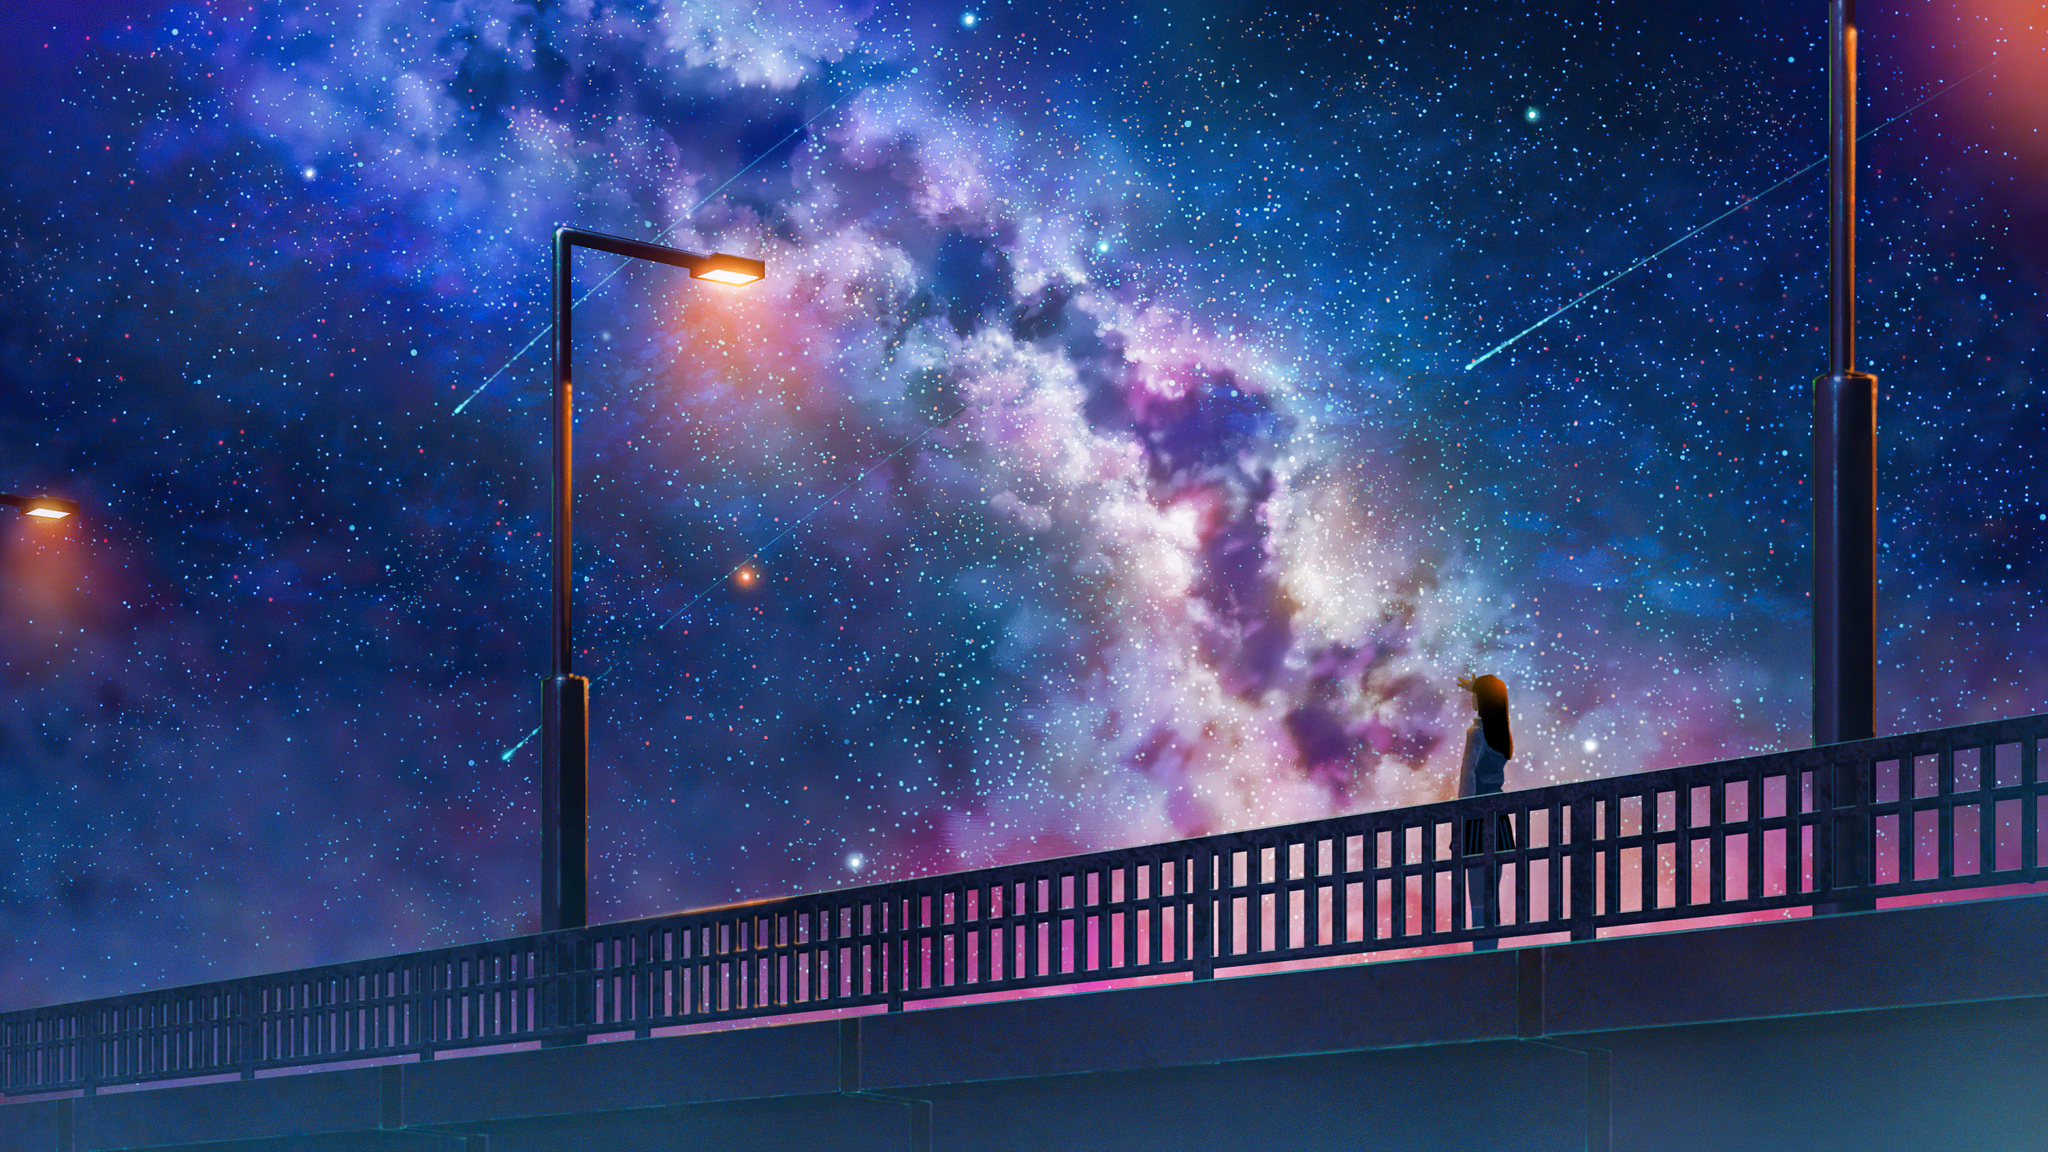 Anime Girl Alone At Bridge Watching The Galaxy Full Of Stars 4k 2048x1152 Resolution HD 4k Wallpaper, Image, Background, Photo and Picture